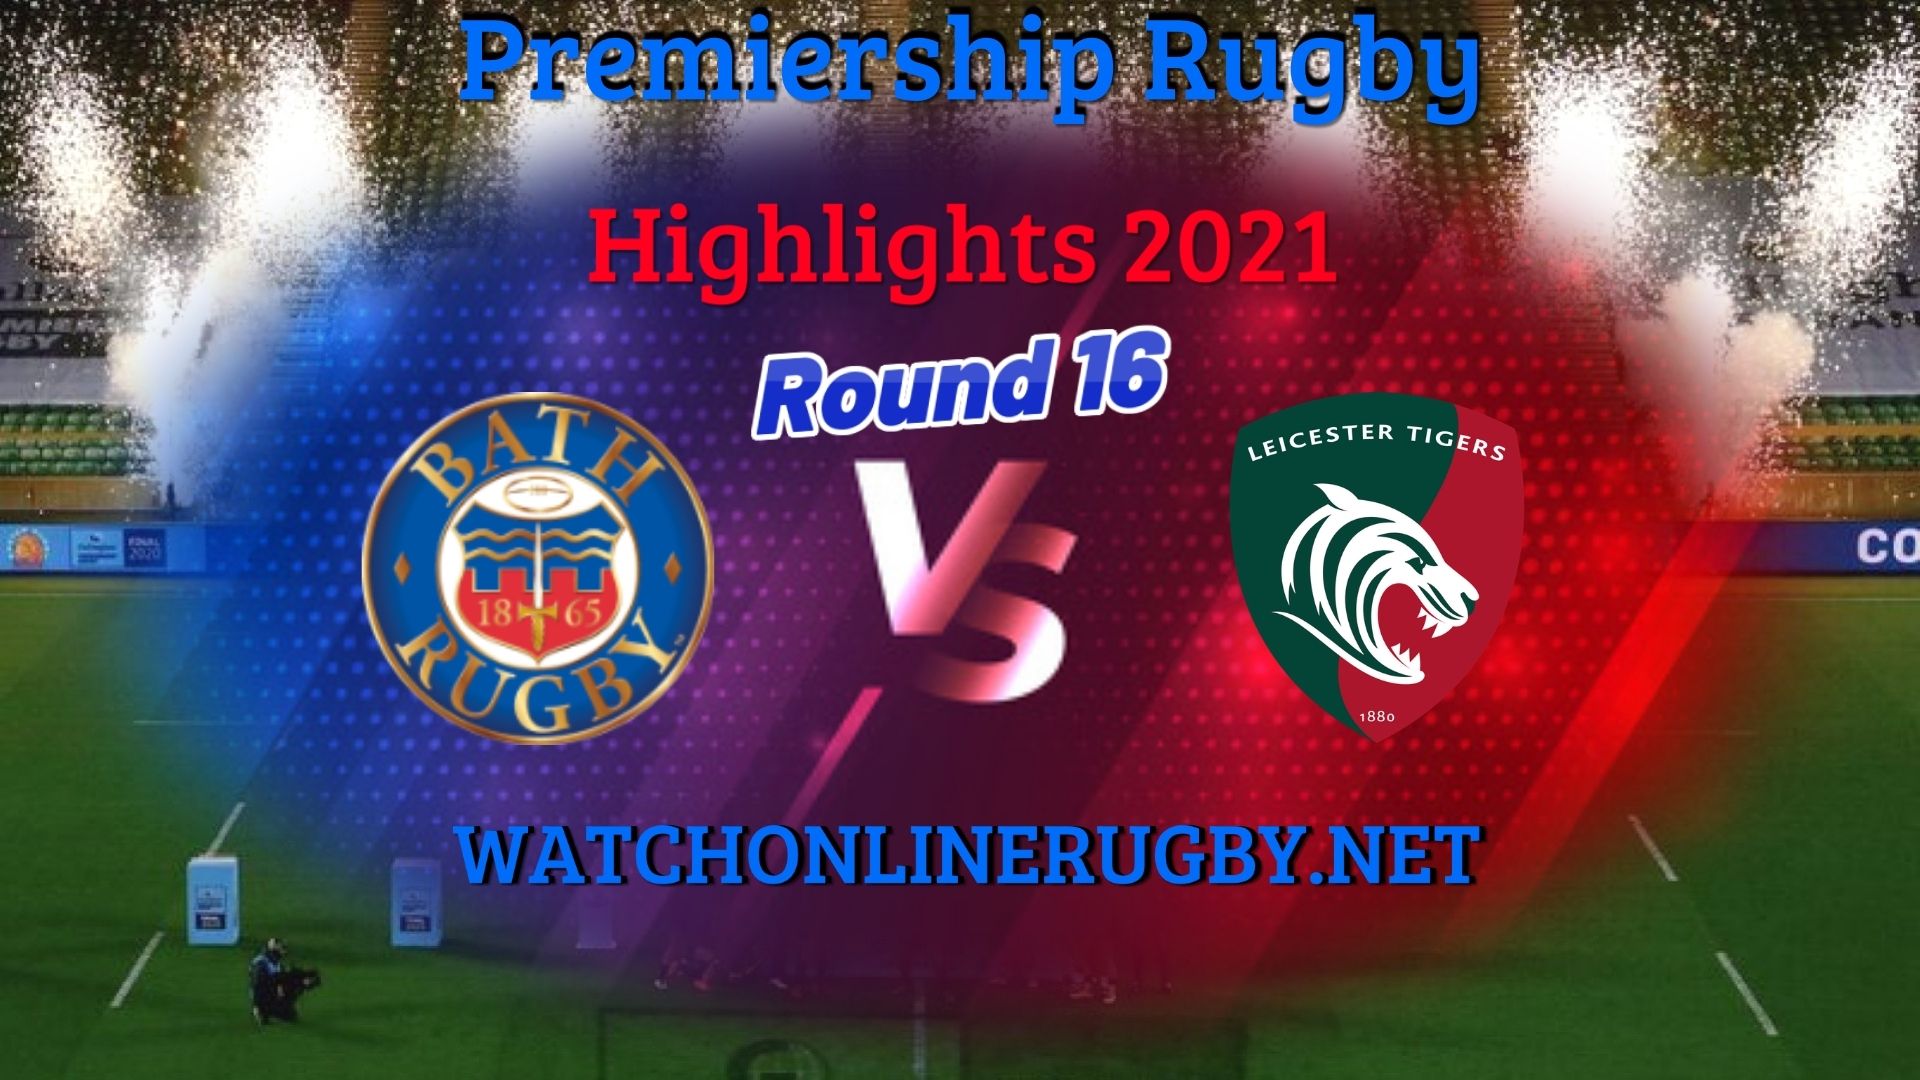 Bath Rugby Vs Leicester Tigers Premiership Rugby 2021 RD 16